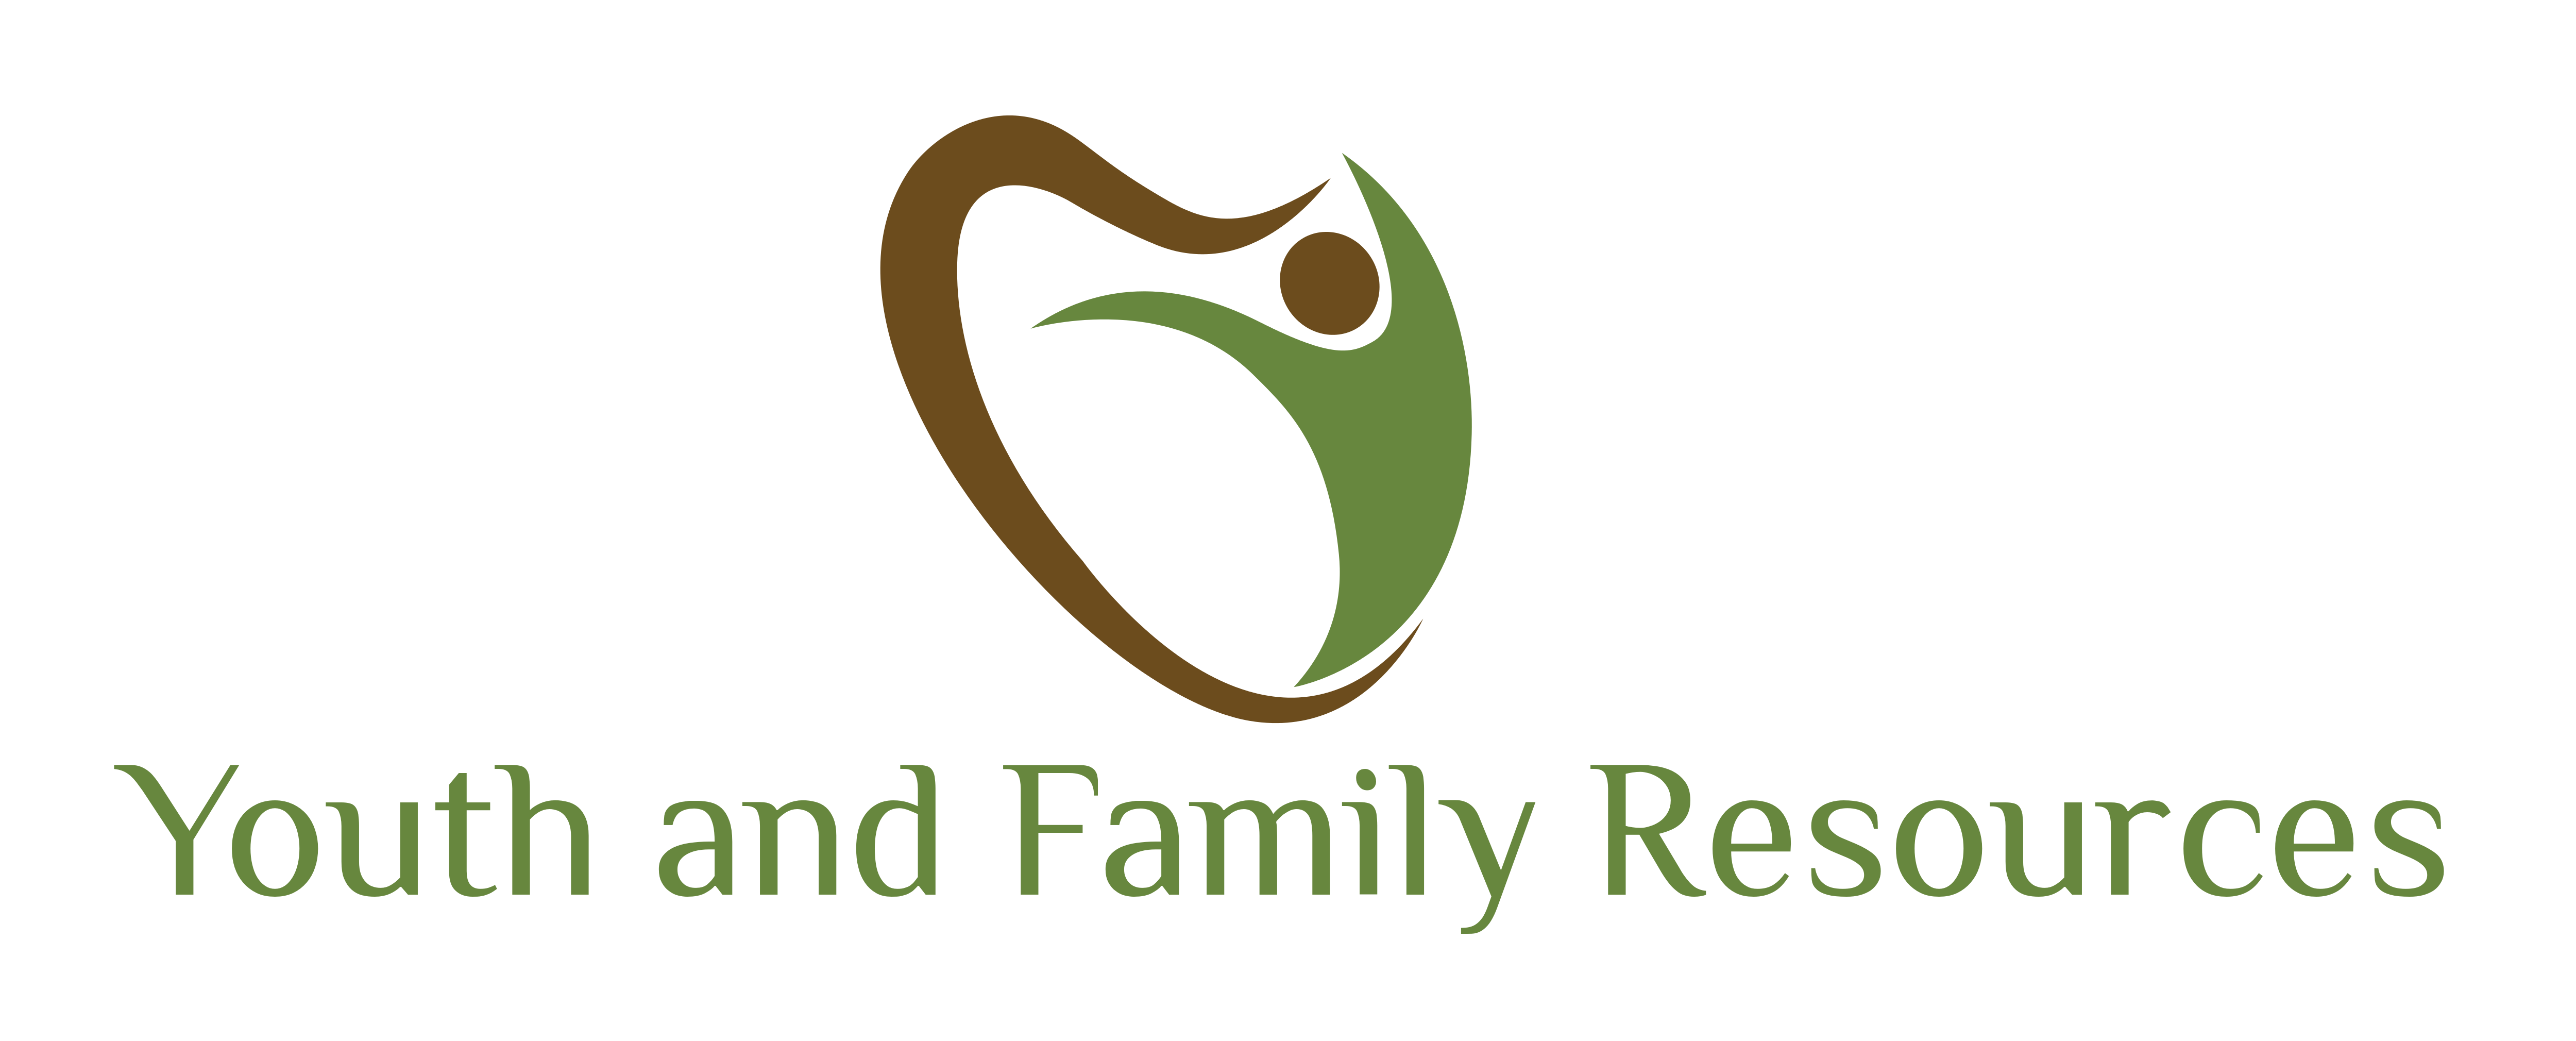 Youth and Family Resources